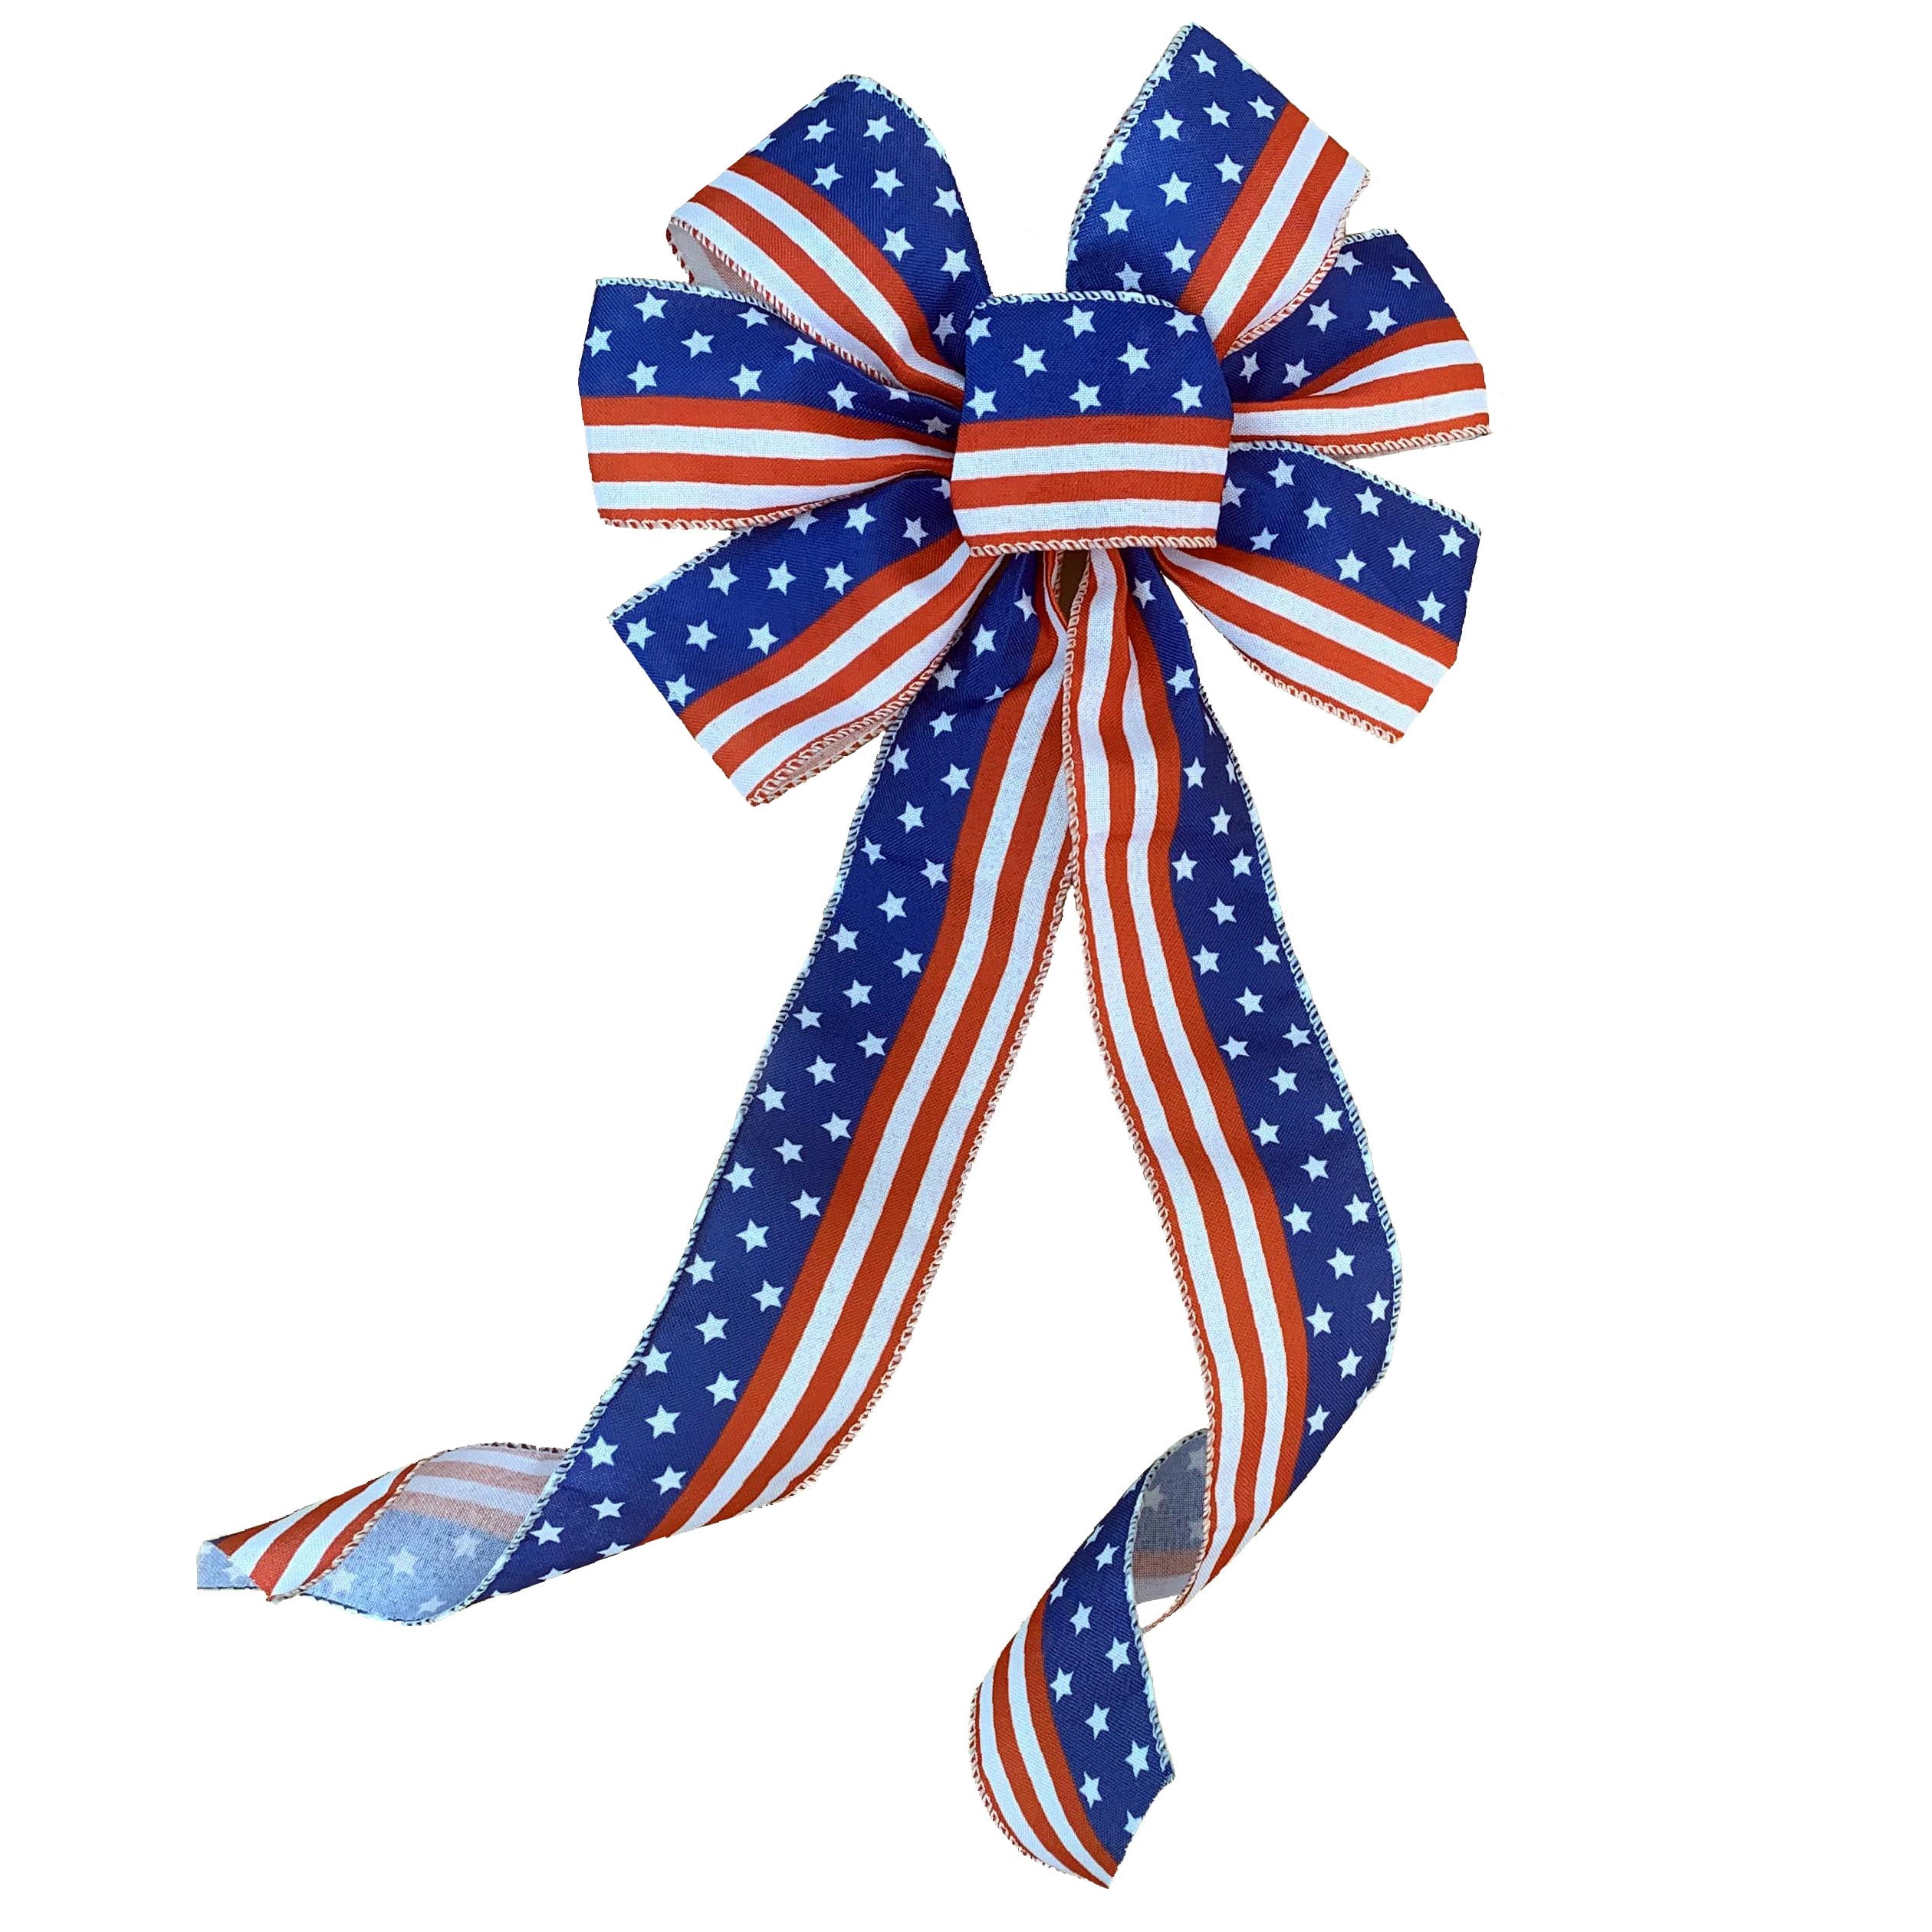 Patriotic Memorial Day Bow Red White Blue Bow Wreath Bow Package Bow 4th of July bow USA Spirit wreath bow Tree Topper 